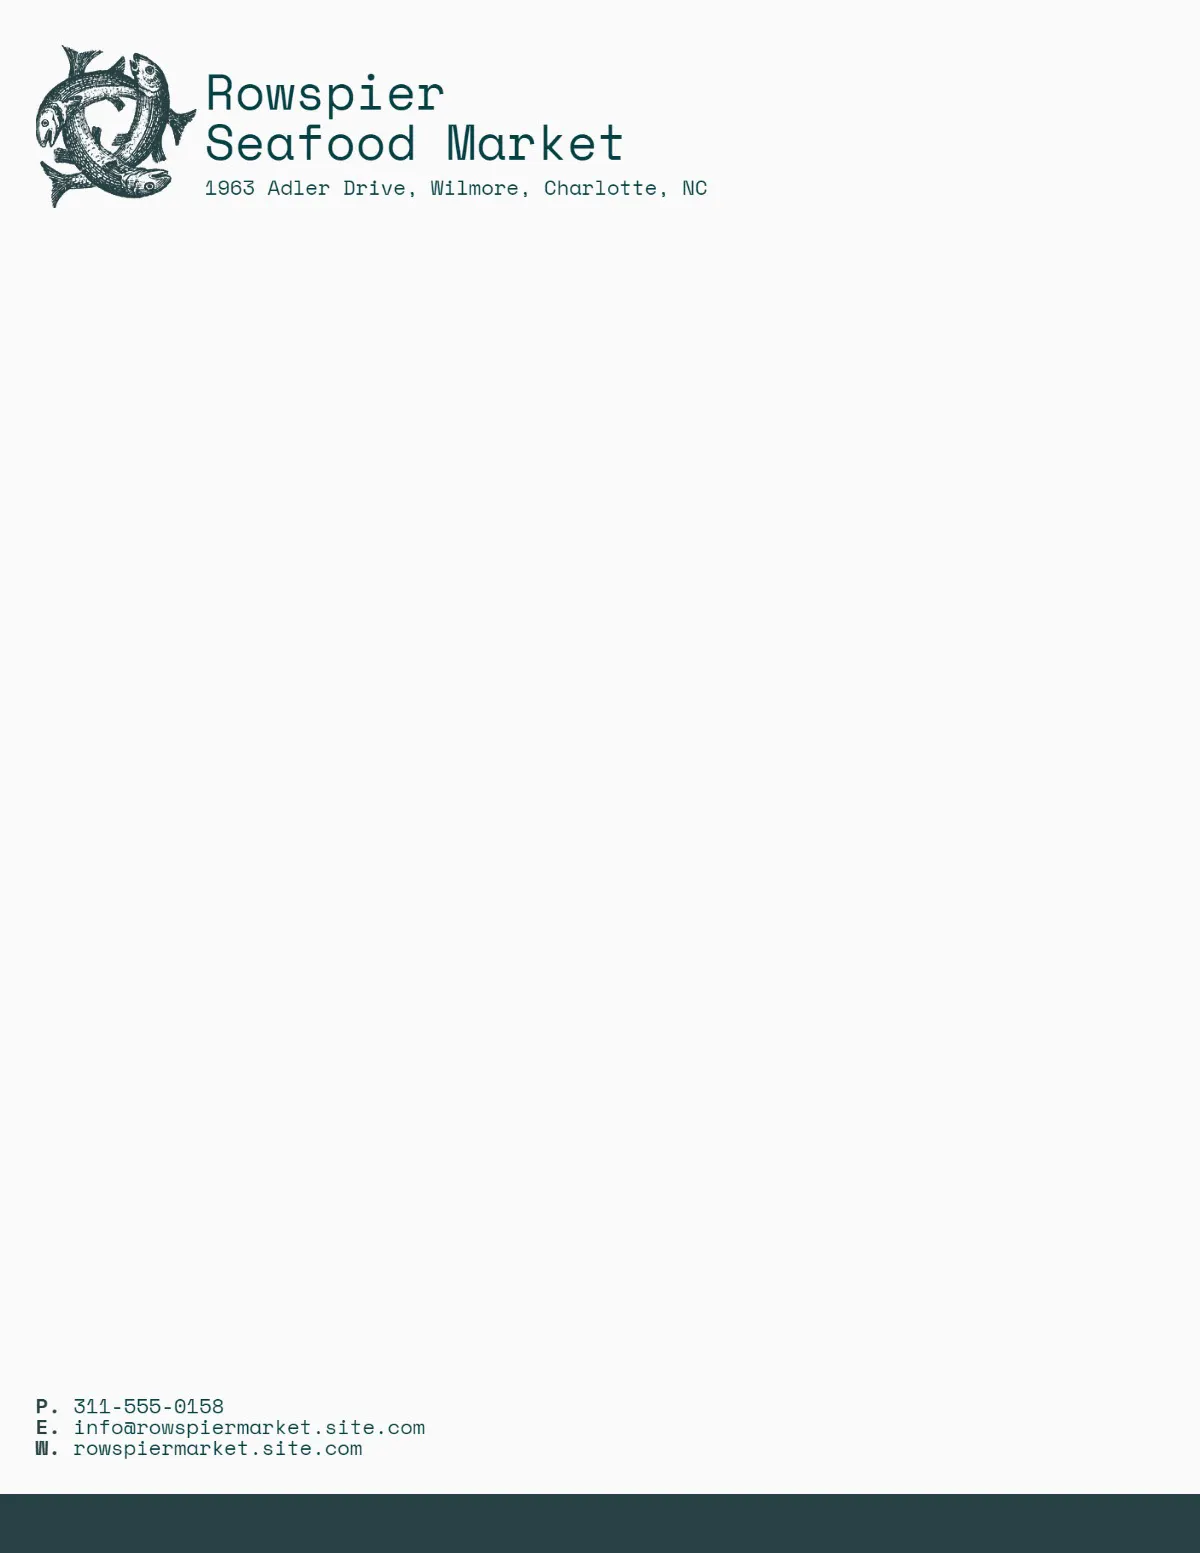 Teal and Gray Seafood Market Letterhead